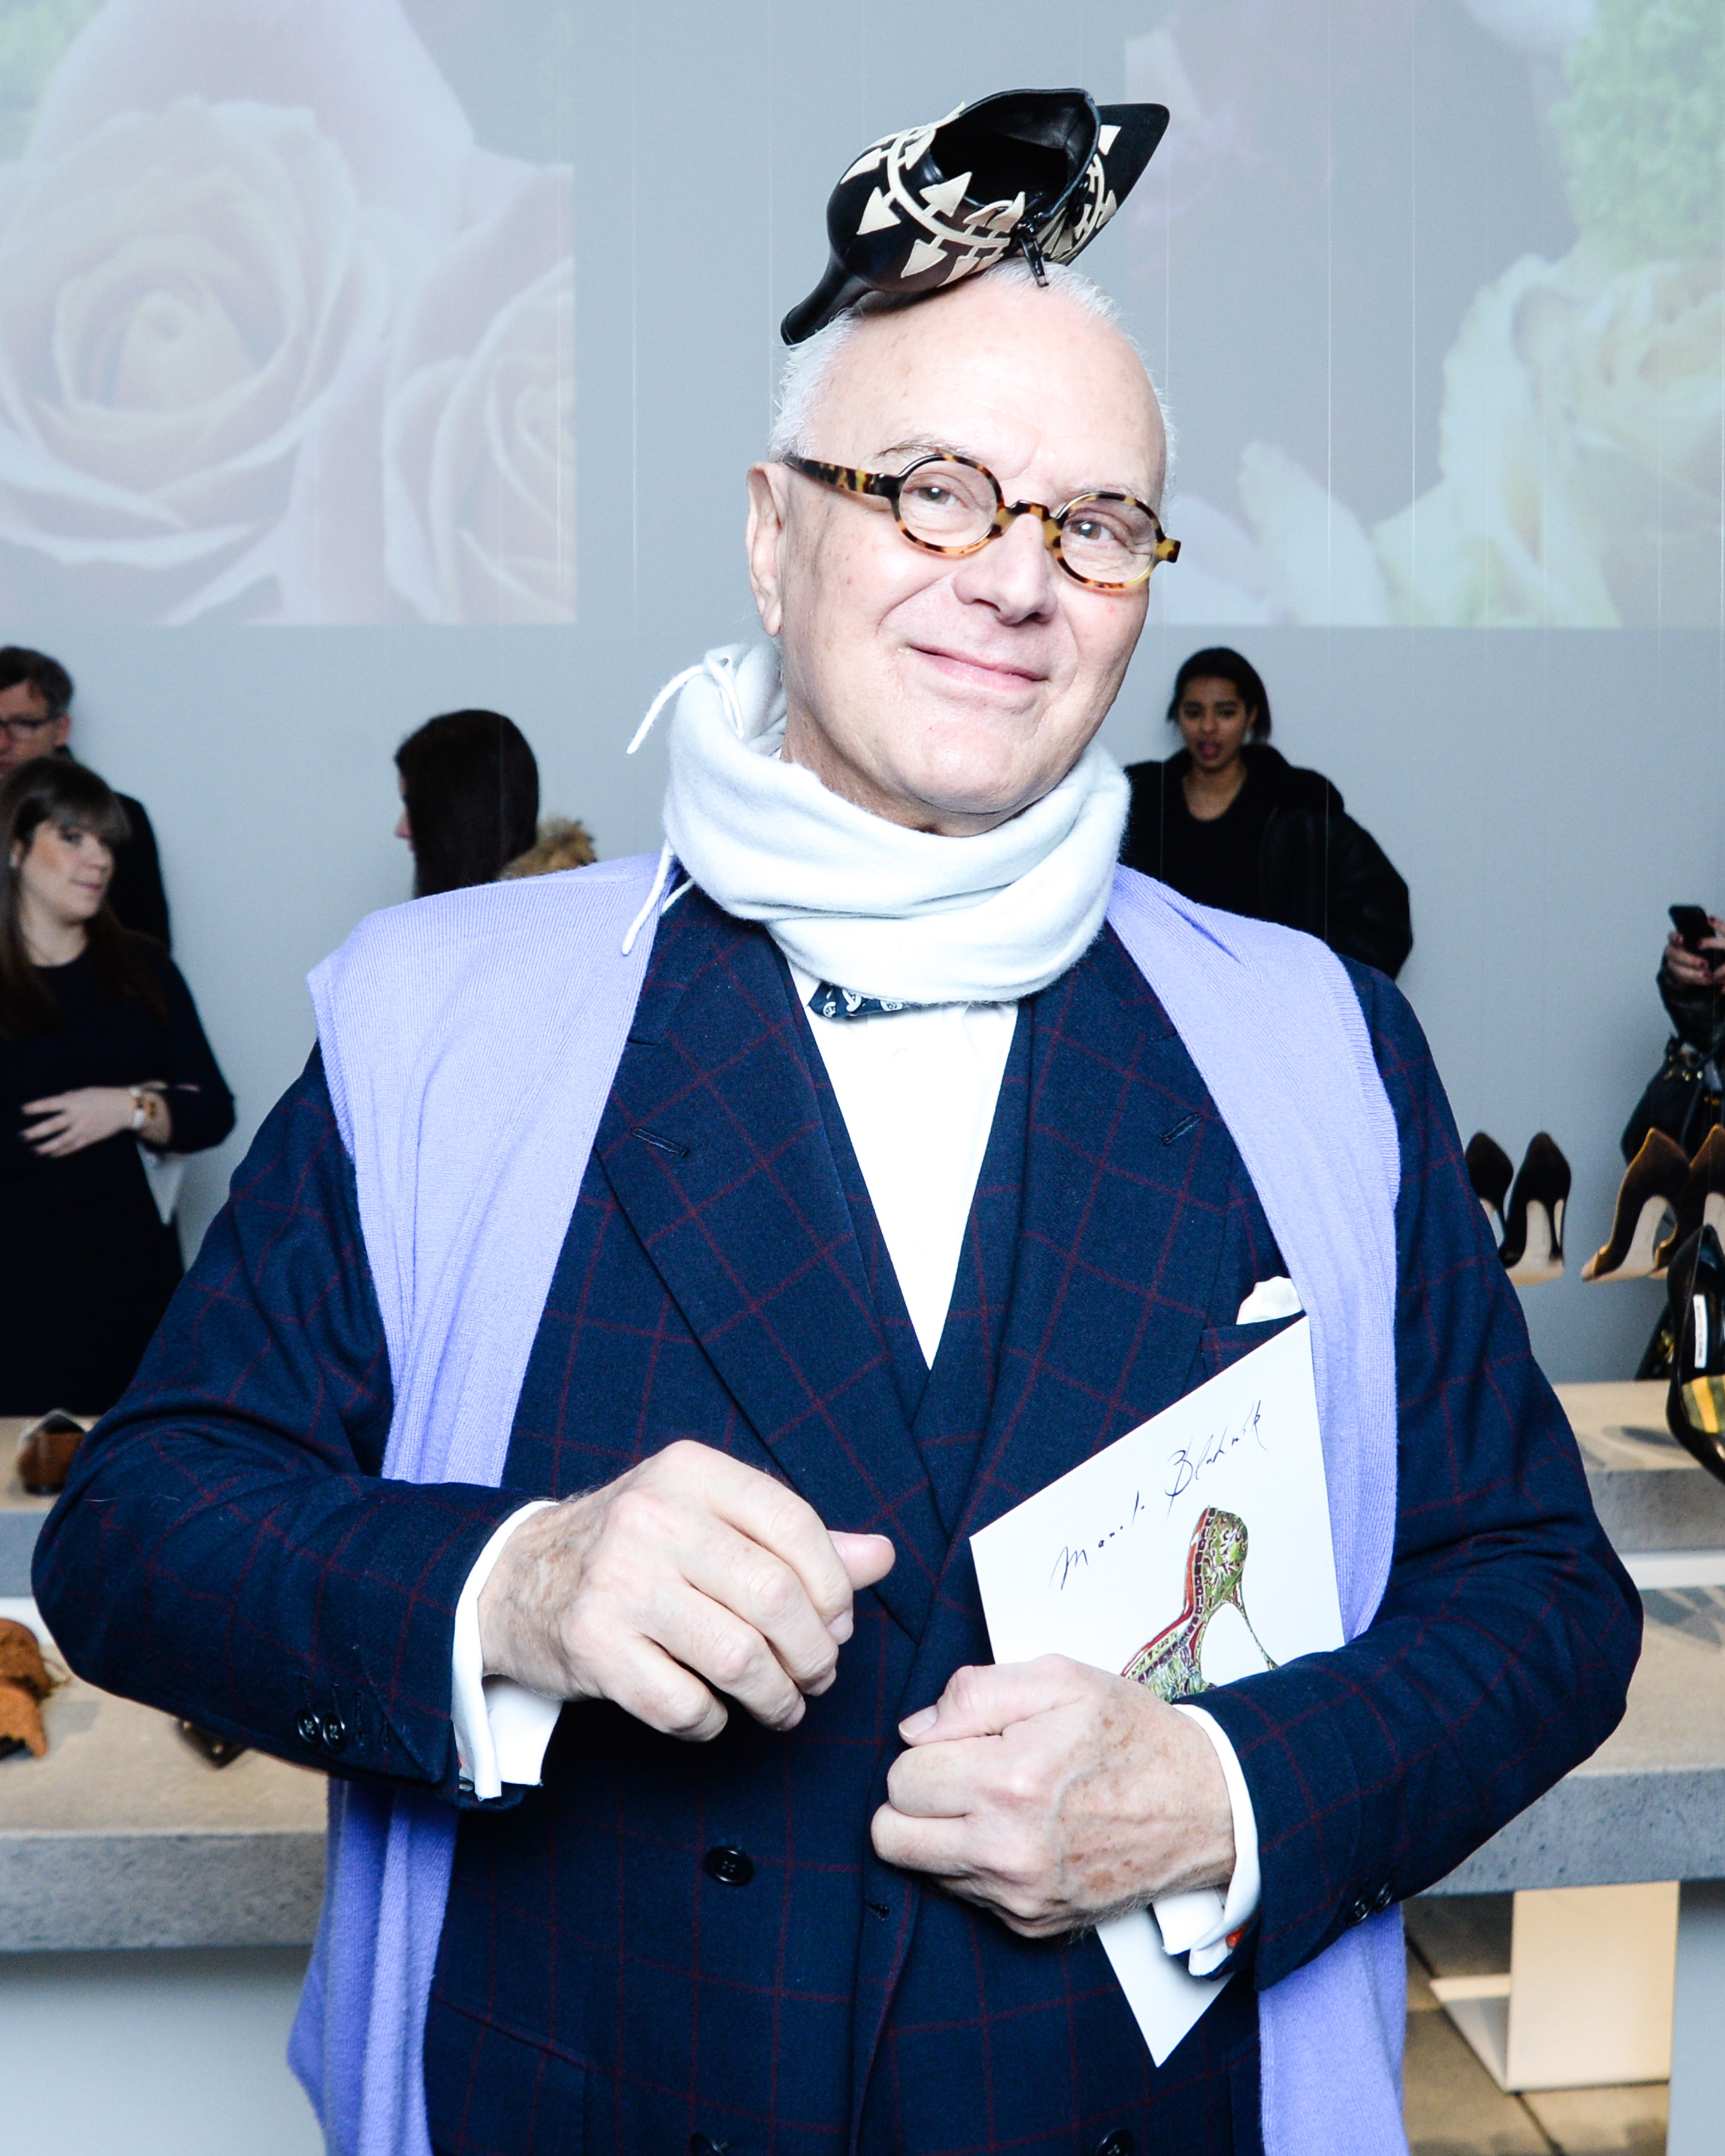 Manolo Blahnik And Falke Pair Up On A Socks Line - Daily Front Row